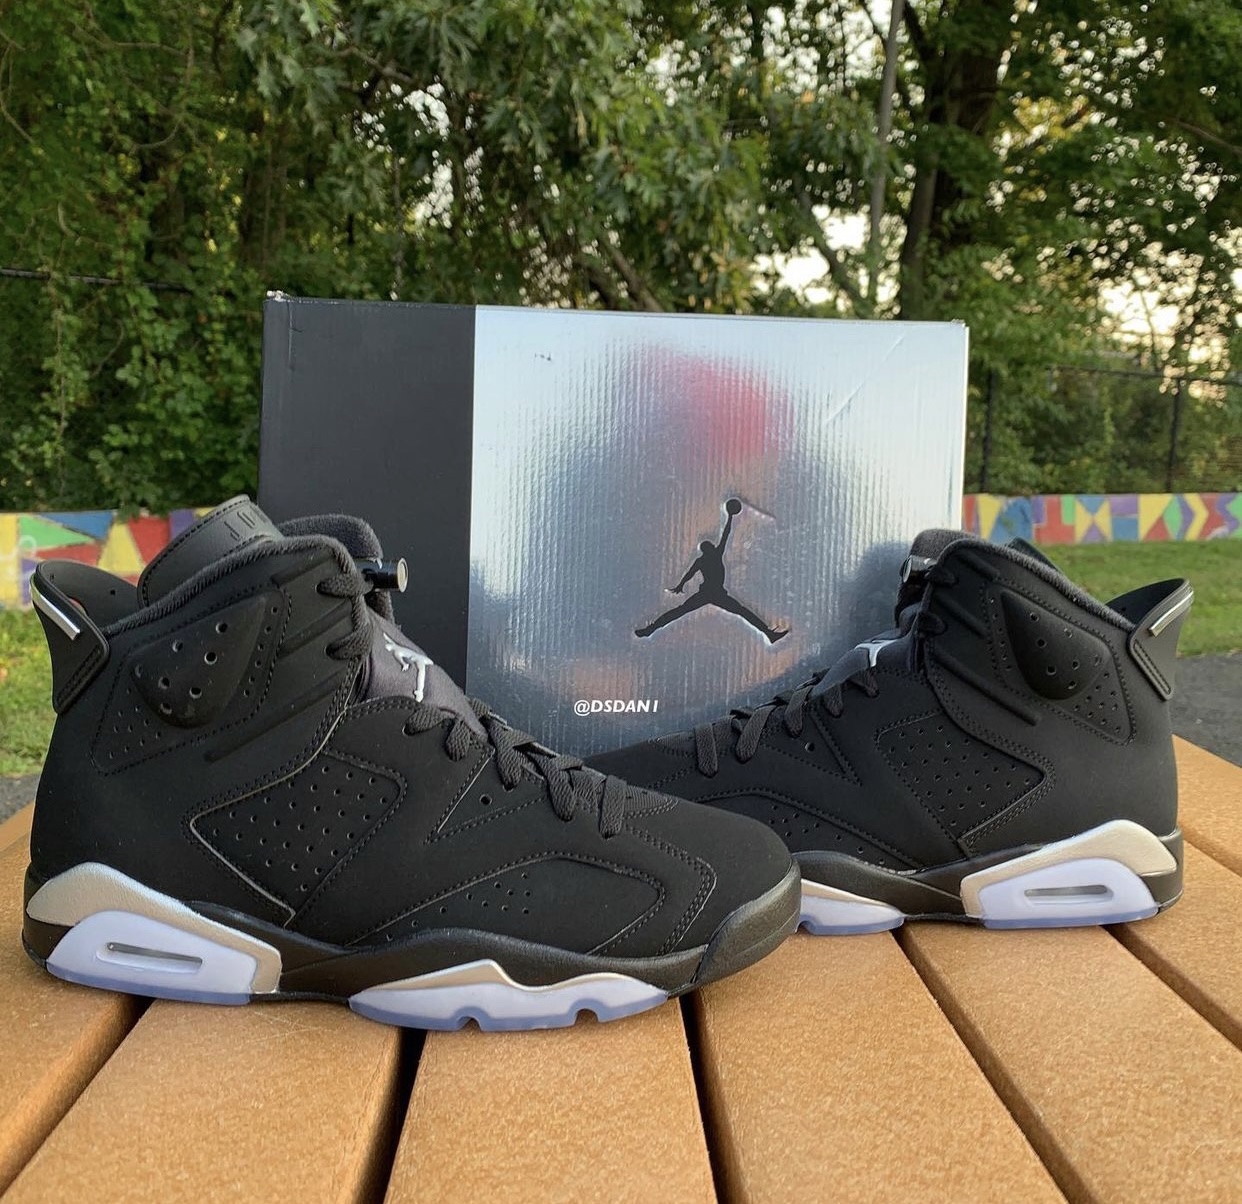 puff on a holiday Cleanly Air Jordan 6 Metallic Silver Chrome DX2836-001 Release Date | SBD